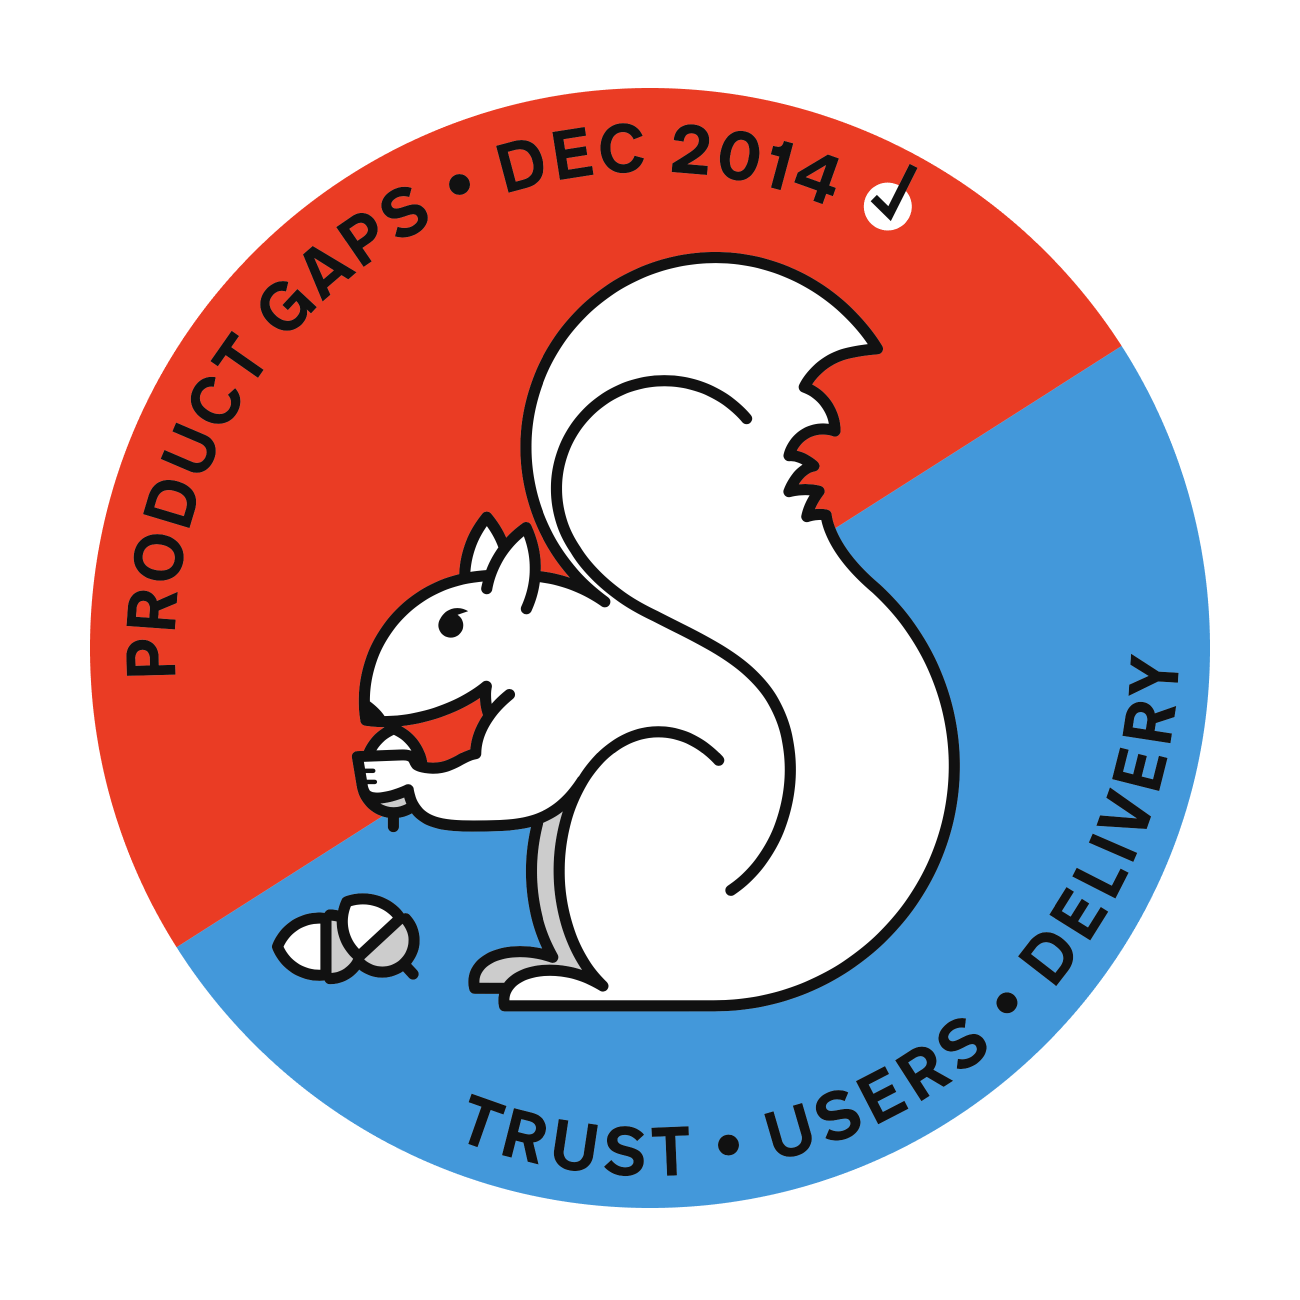 An illustrated mission patch for the Product Gaps Team, showing a squirrel on a blue and red background